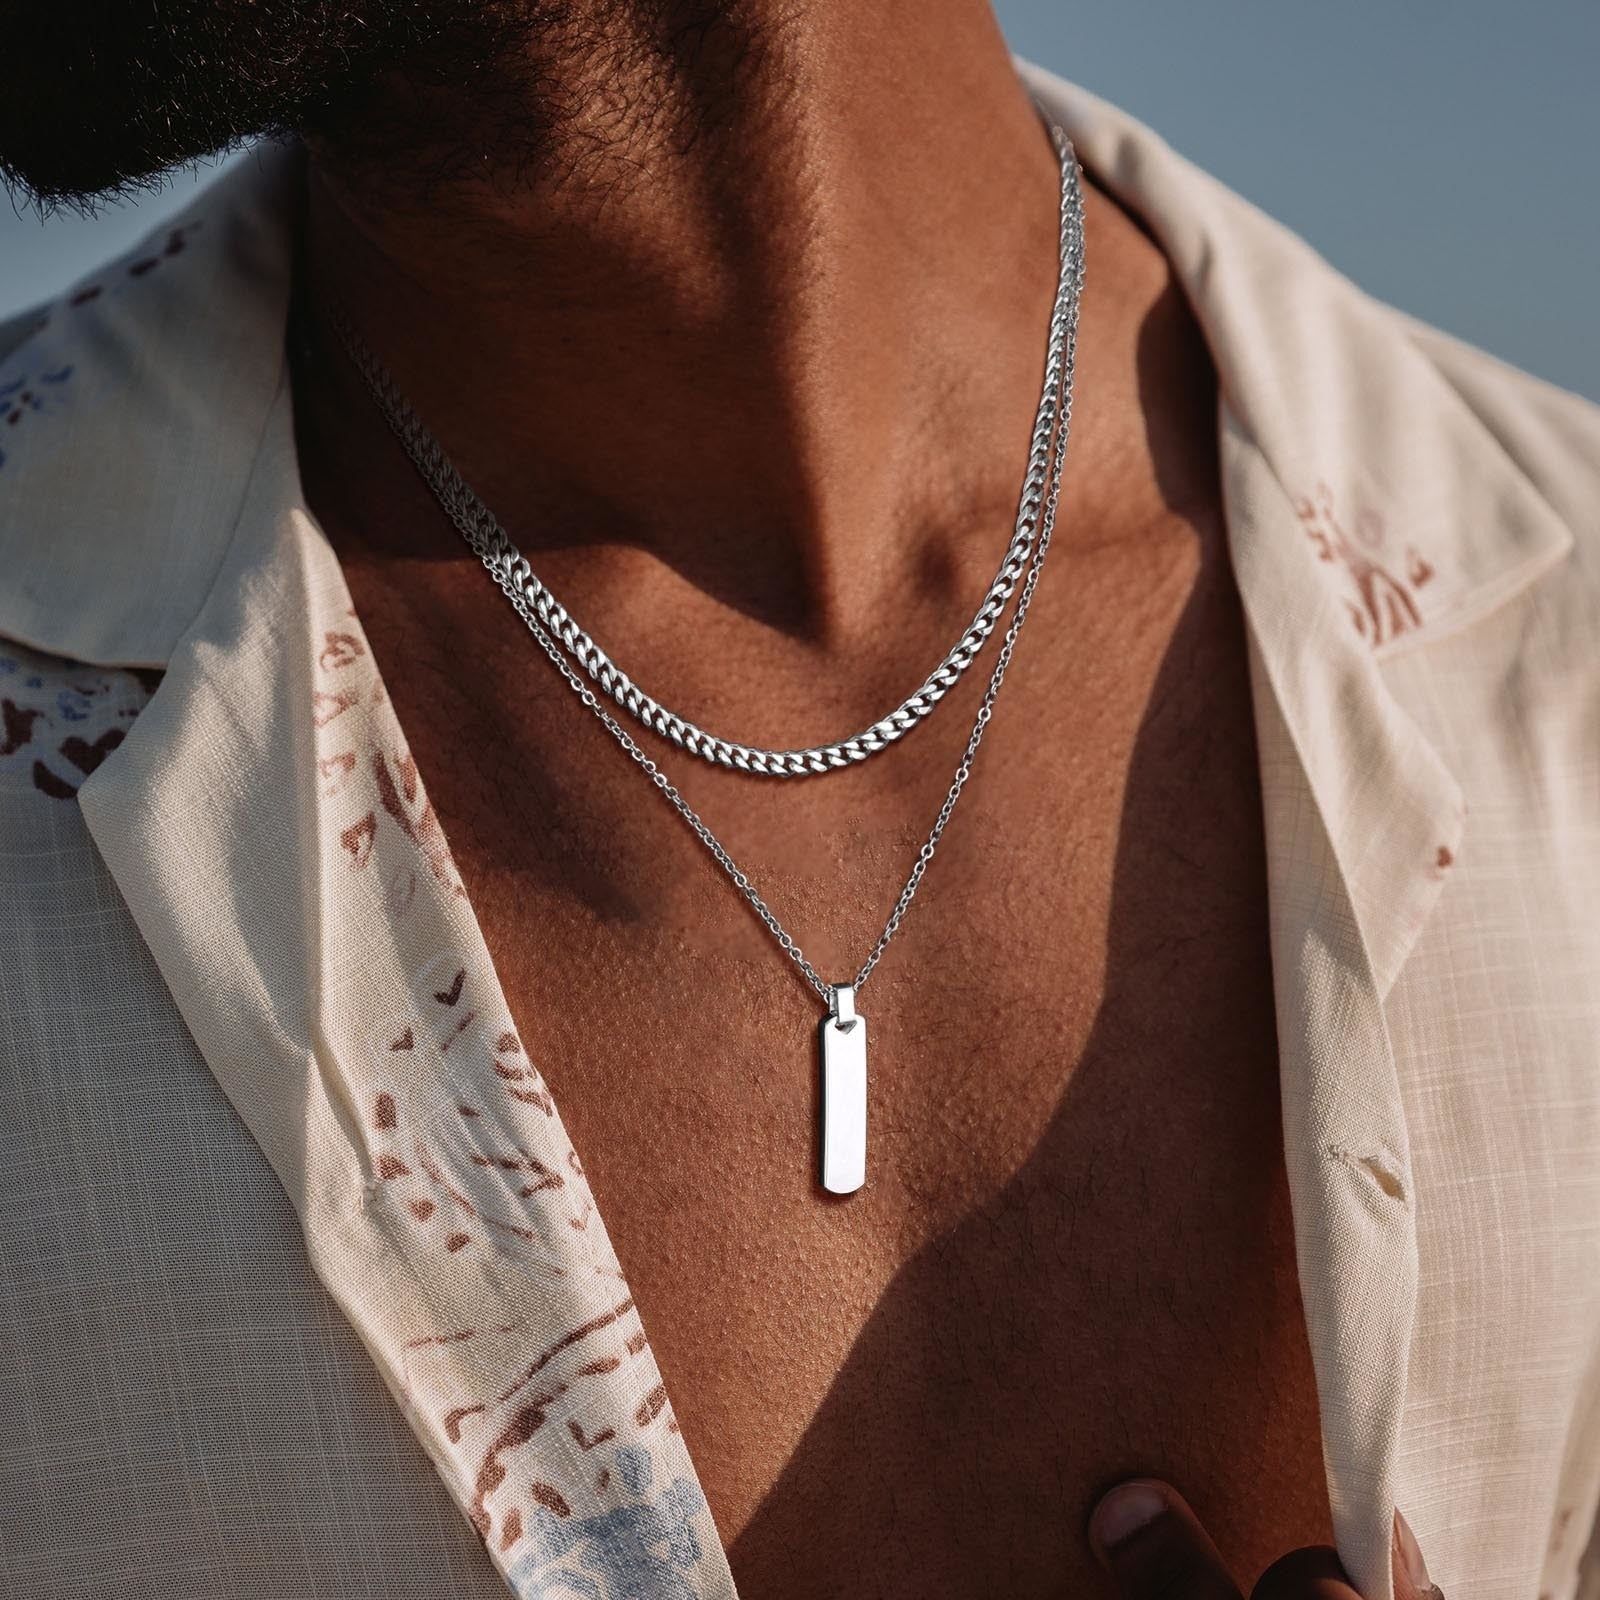 Stylish Thick Geometric Vertical Bar Pendant Necklaces for Men